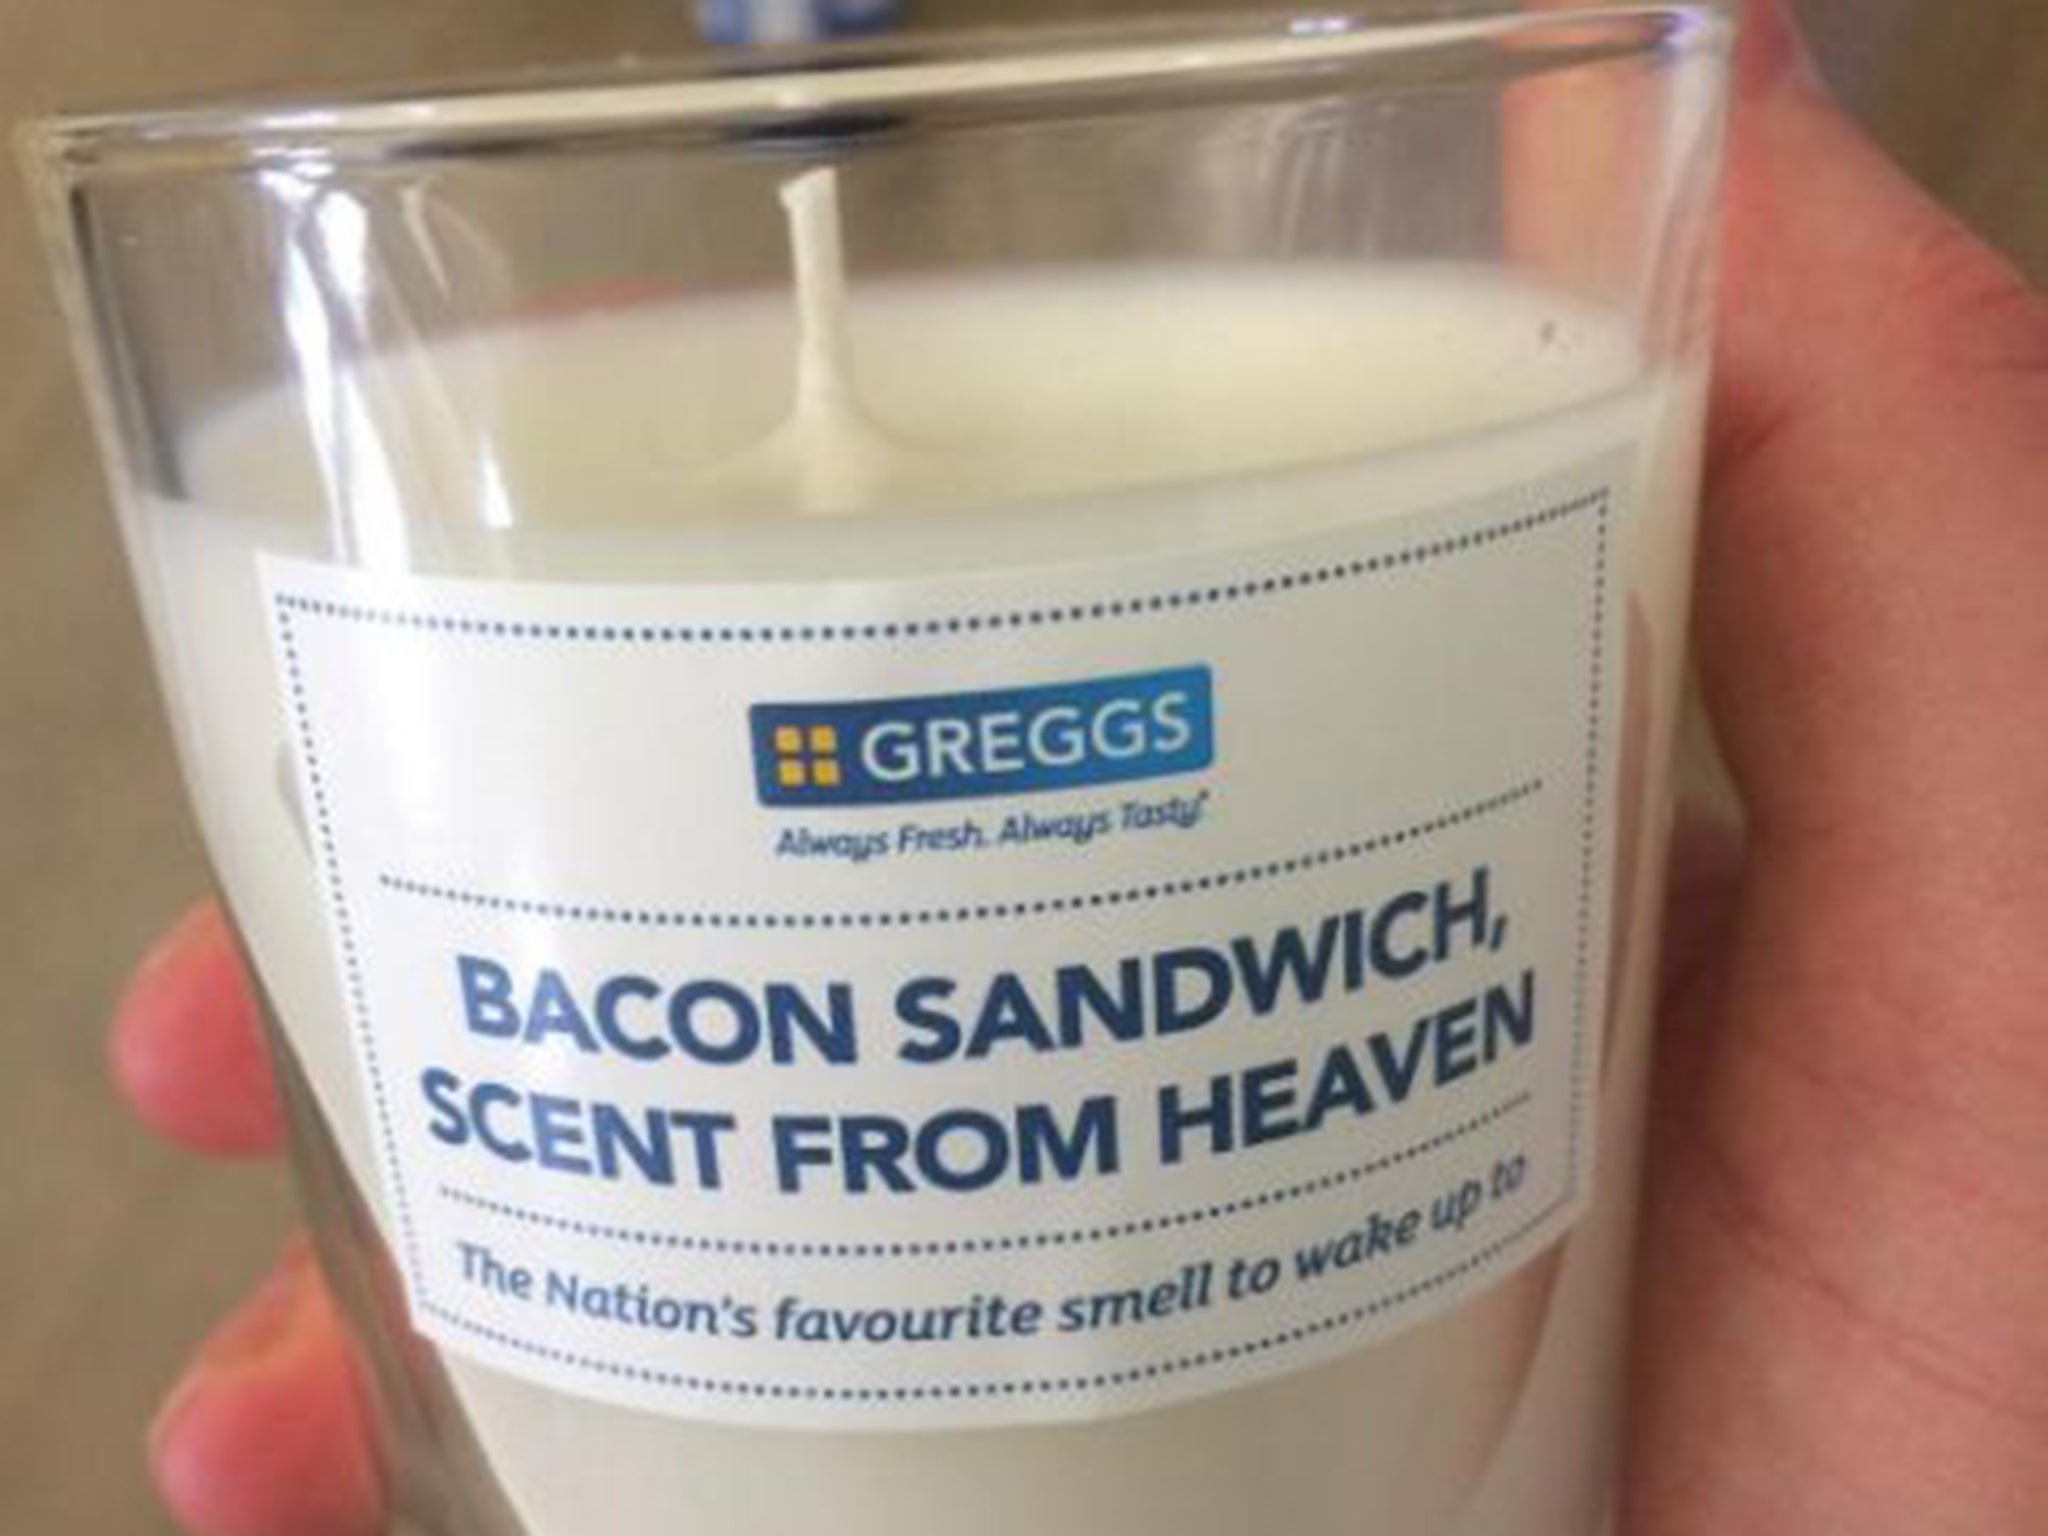 Some media outlets assumed that the bacon-scented candle was available to buy in branches of Greggs around the country. It isn’t.